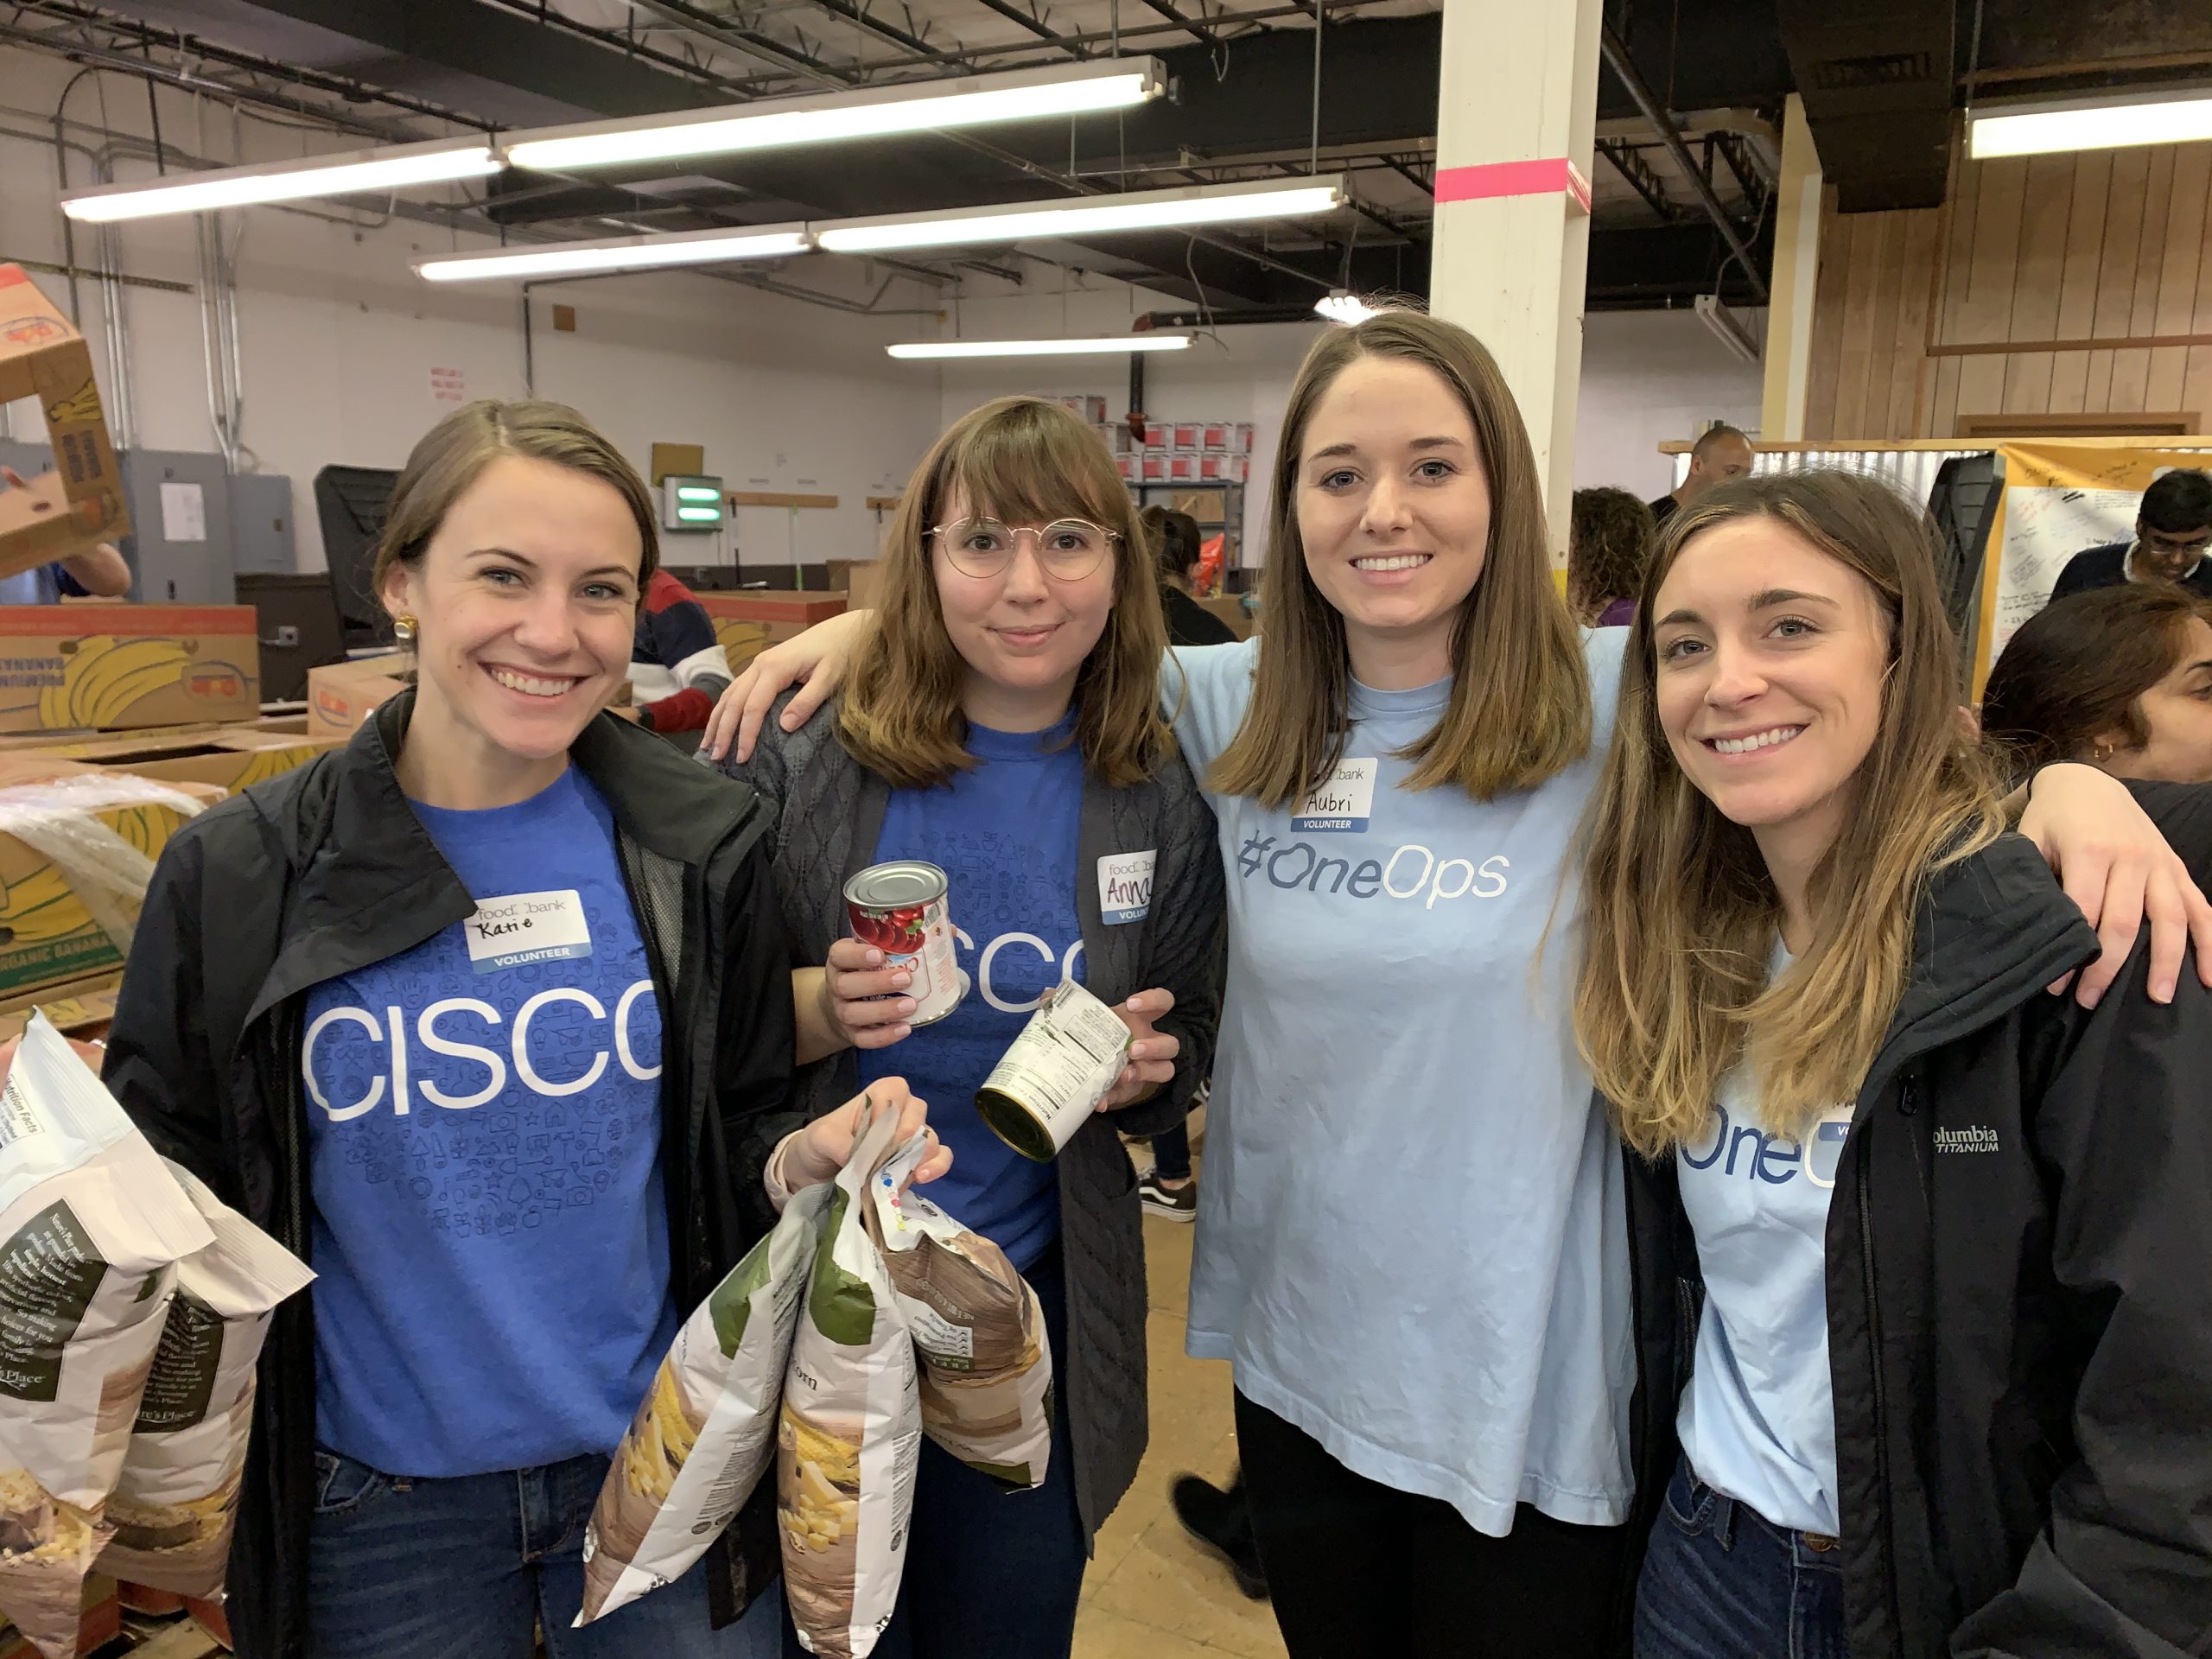 Katie with fellow employees at a giveback event.